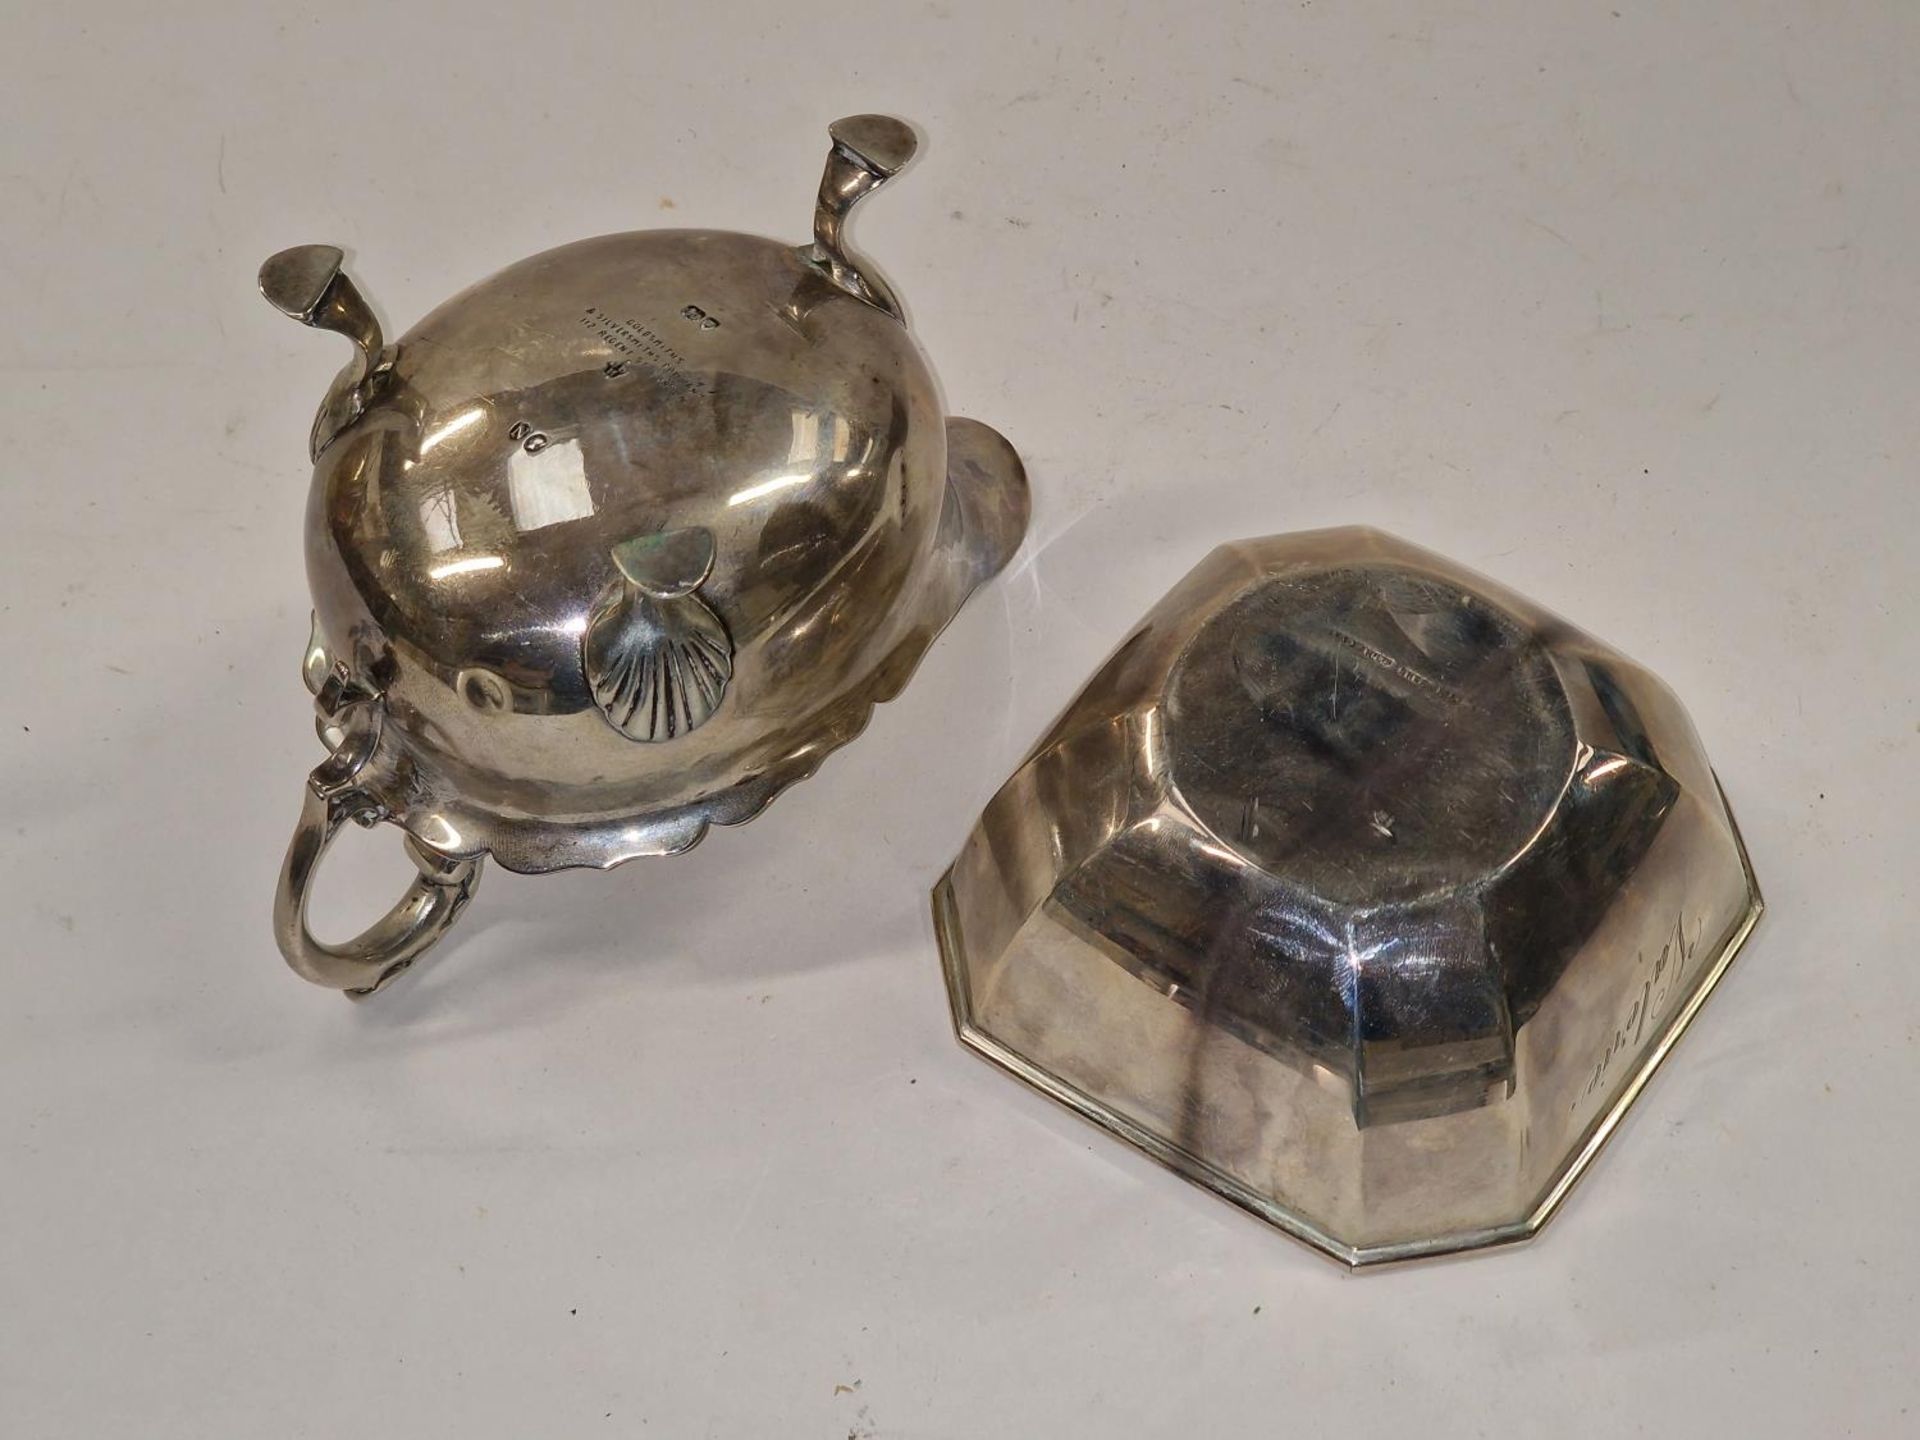 925 silver 3 leg sauce boat by Goldsmith and company. together a silver sugar bowl 350g - Image 3 of 5